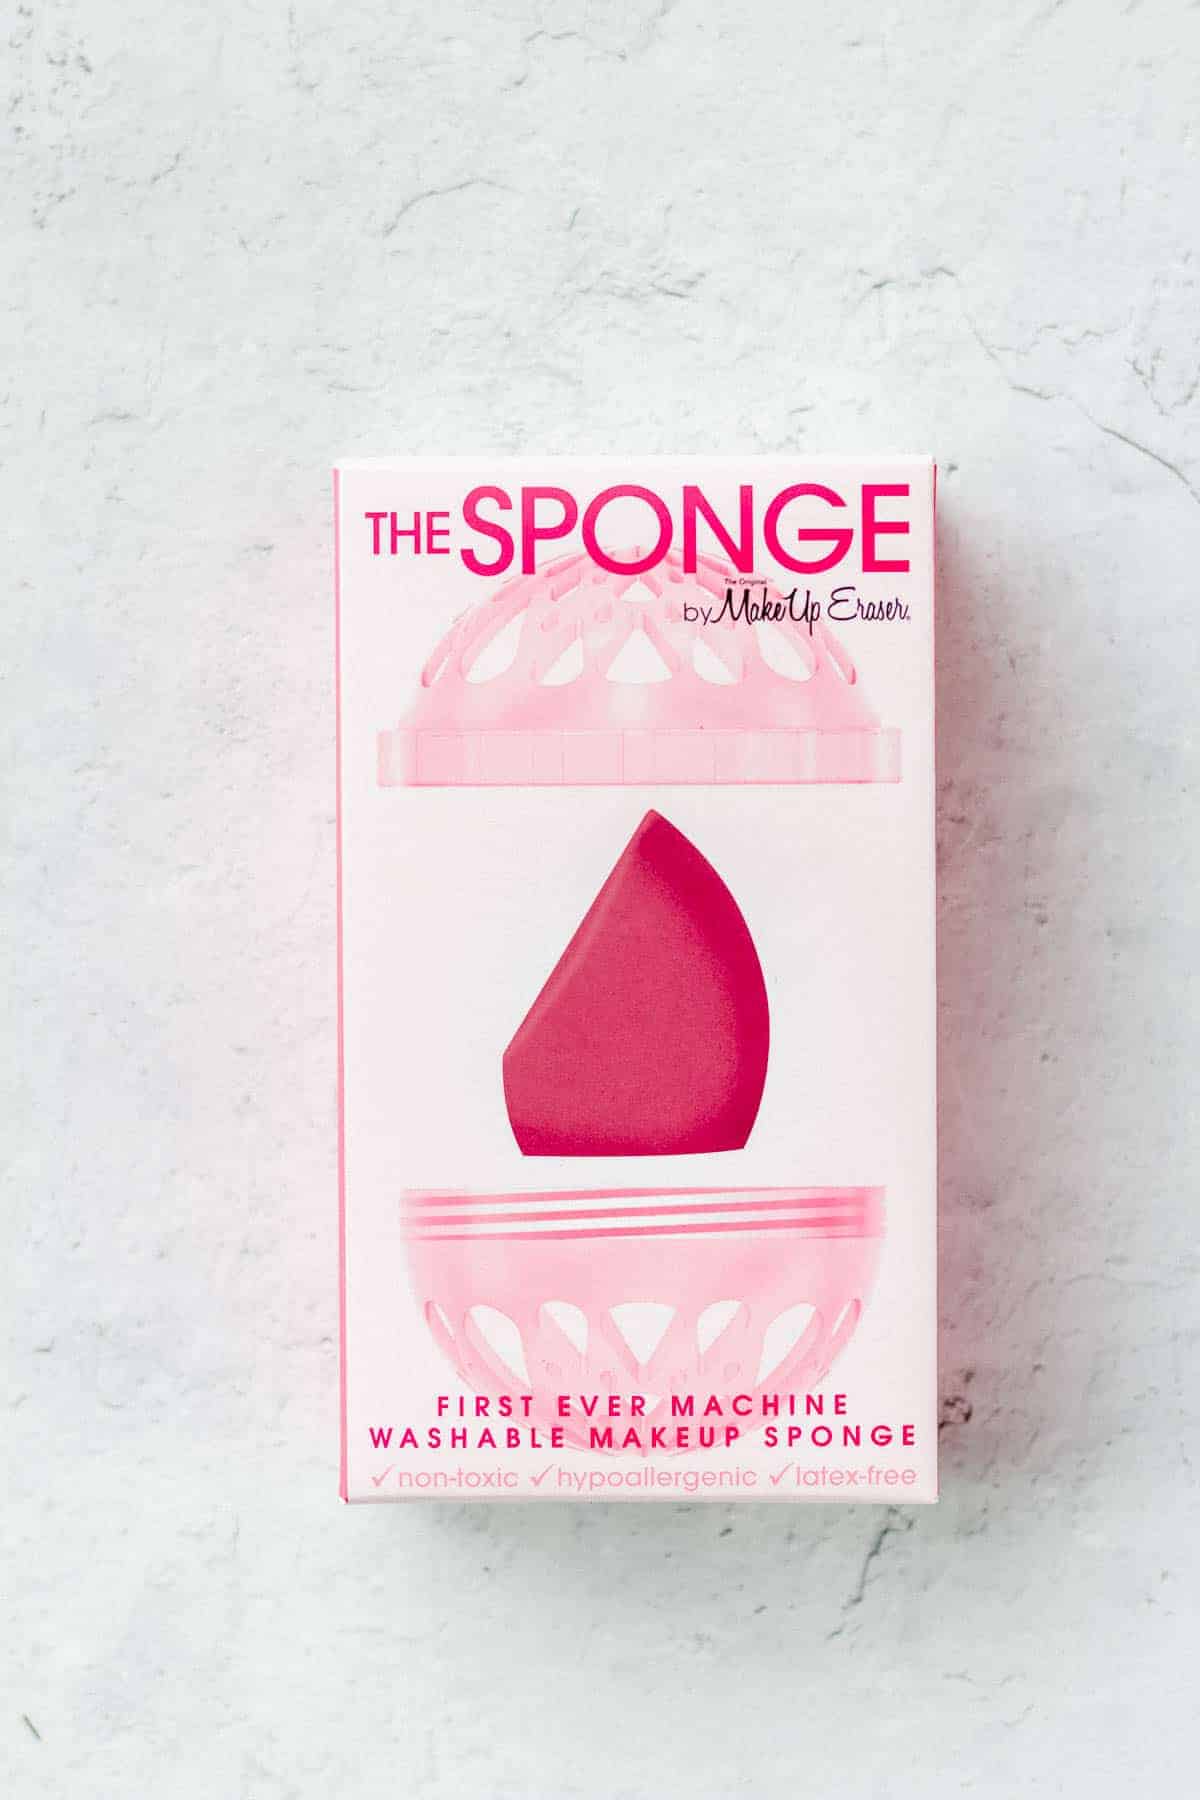 The Sponge from The Original makeup Eraser box on a white background